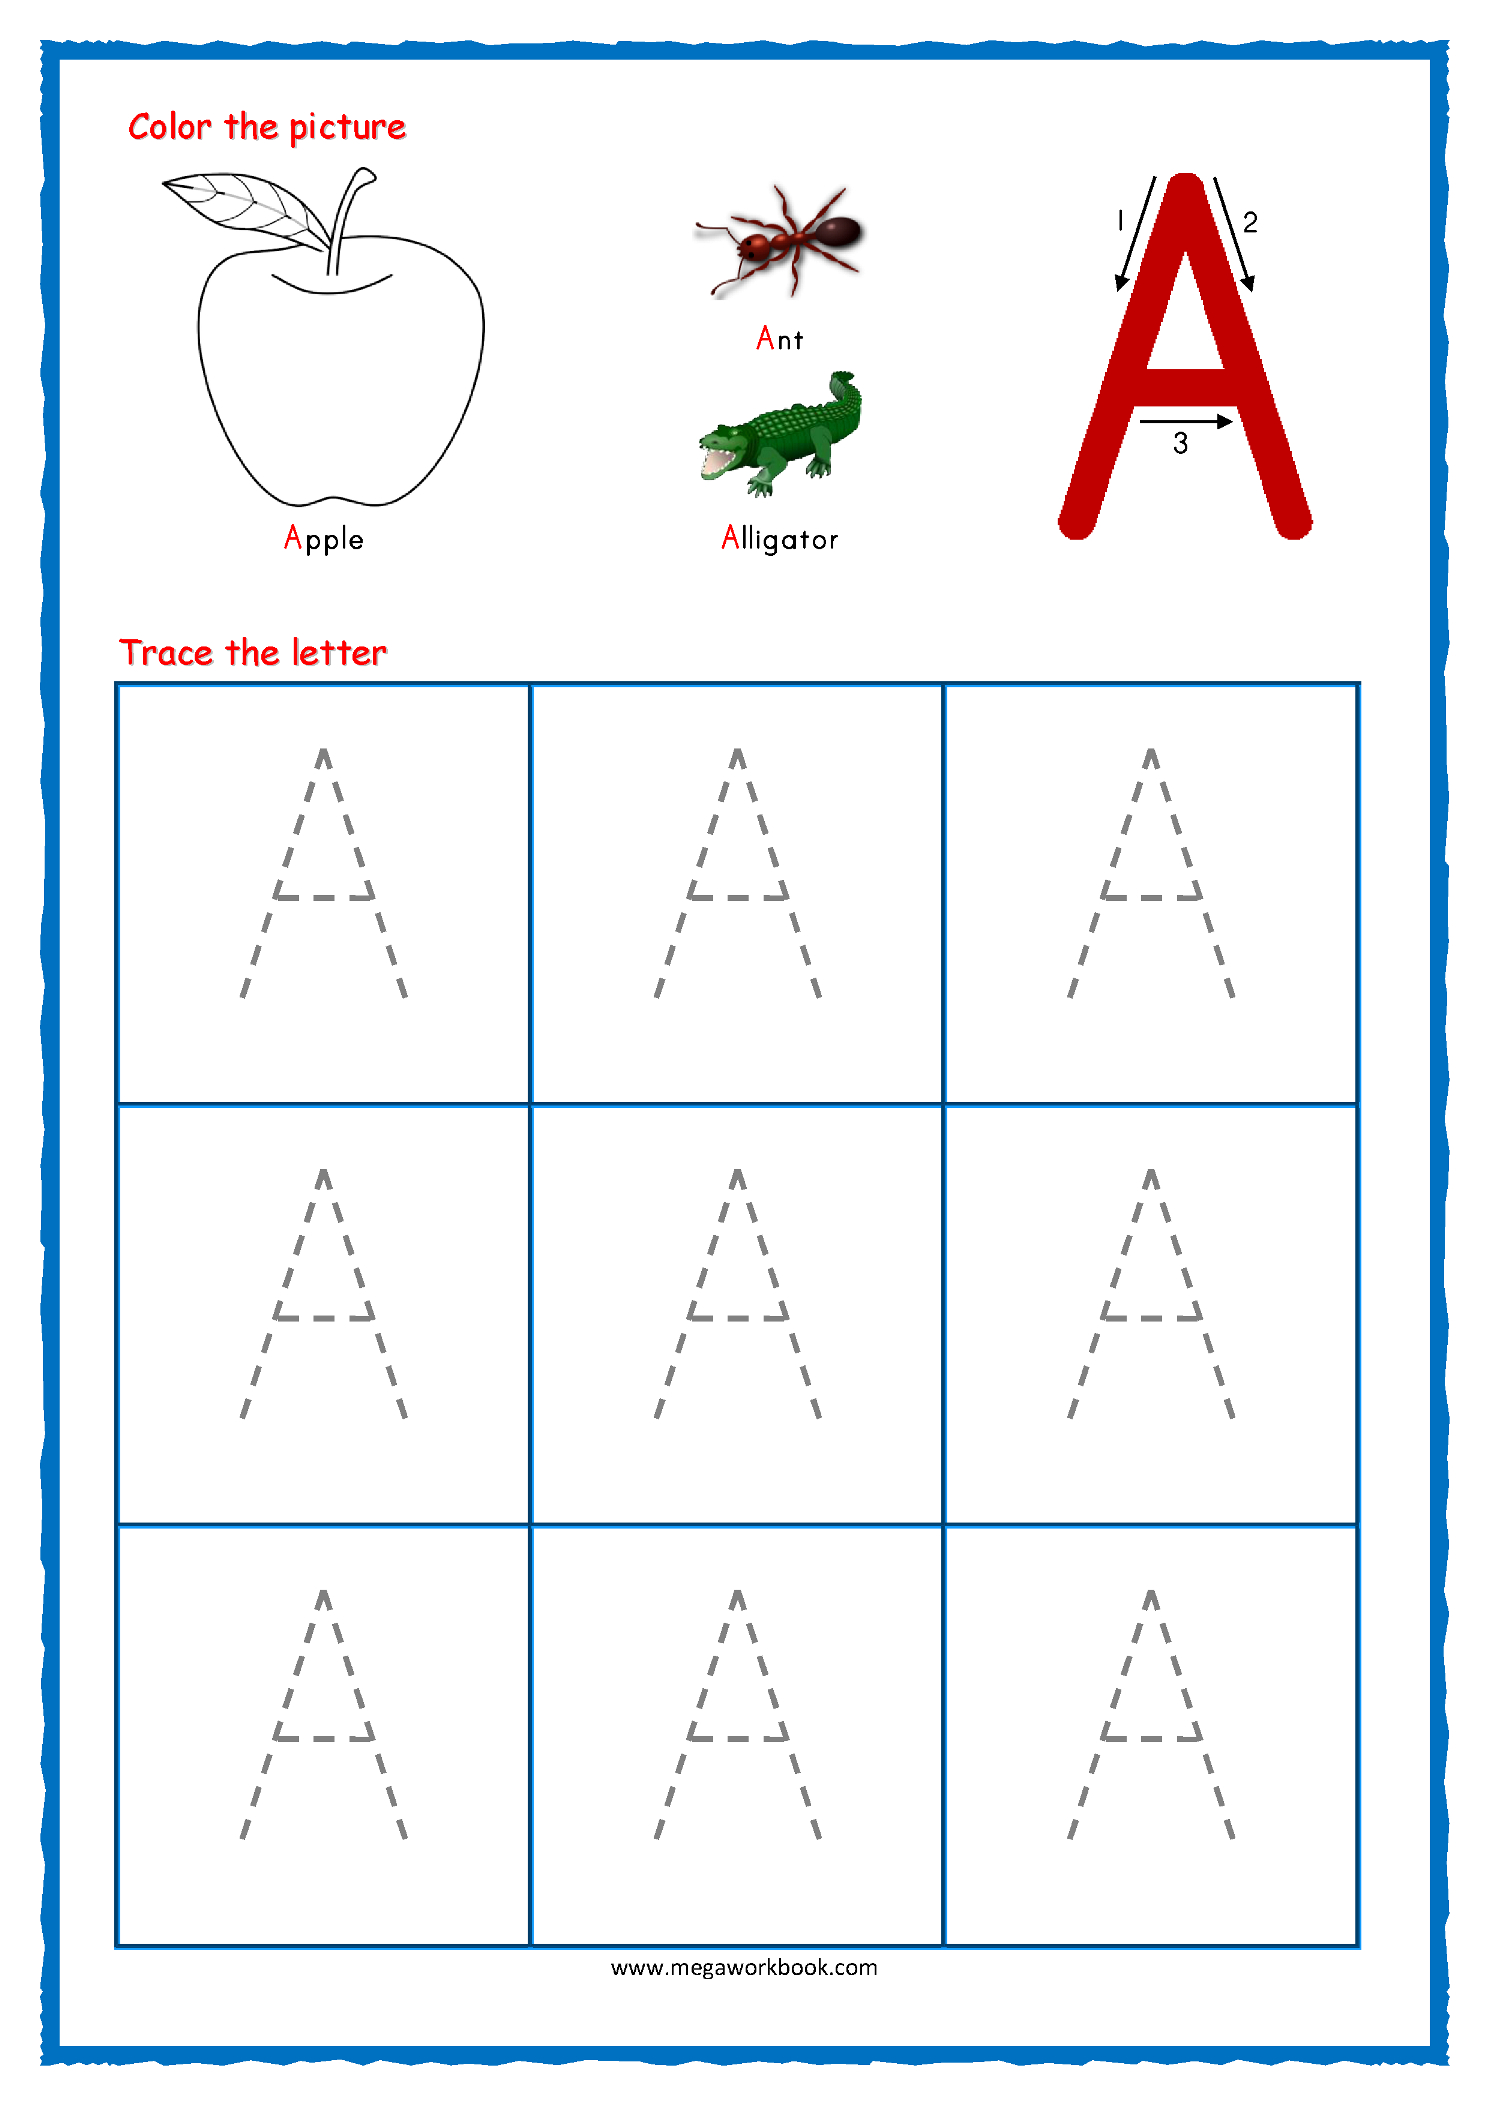 Tracing Letters - Alphabet Tracing - Capital Letters within Tracing Letters Worksheets For Pre-K